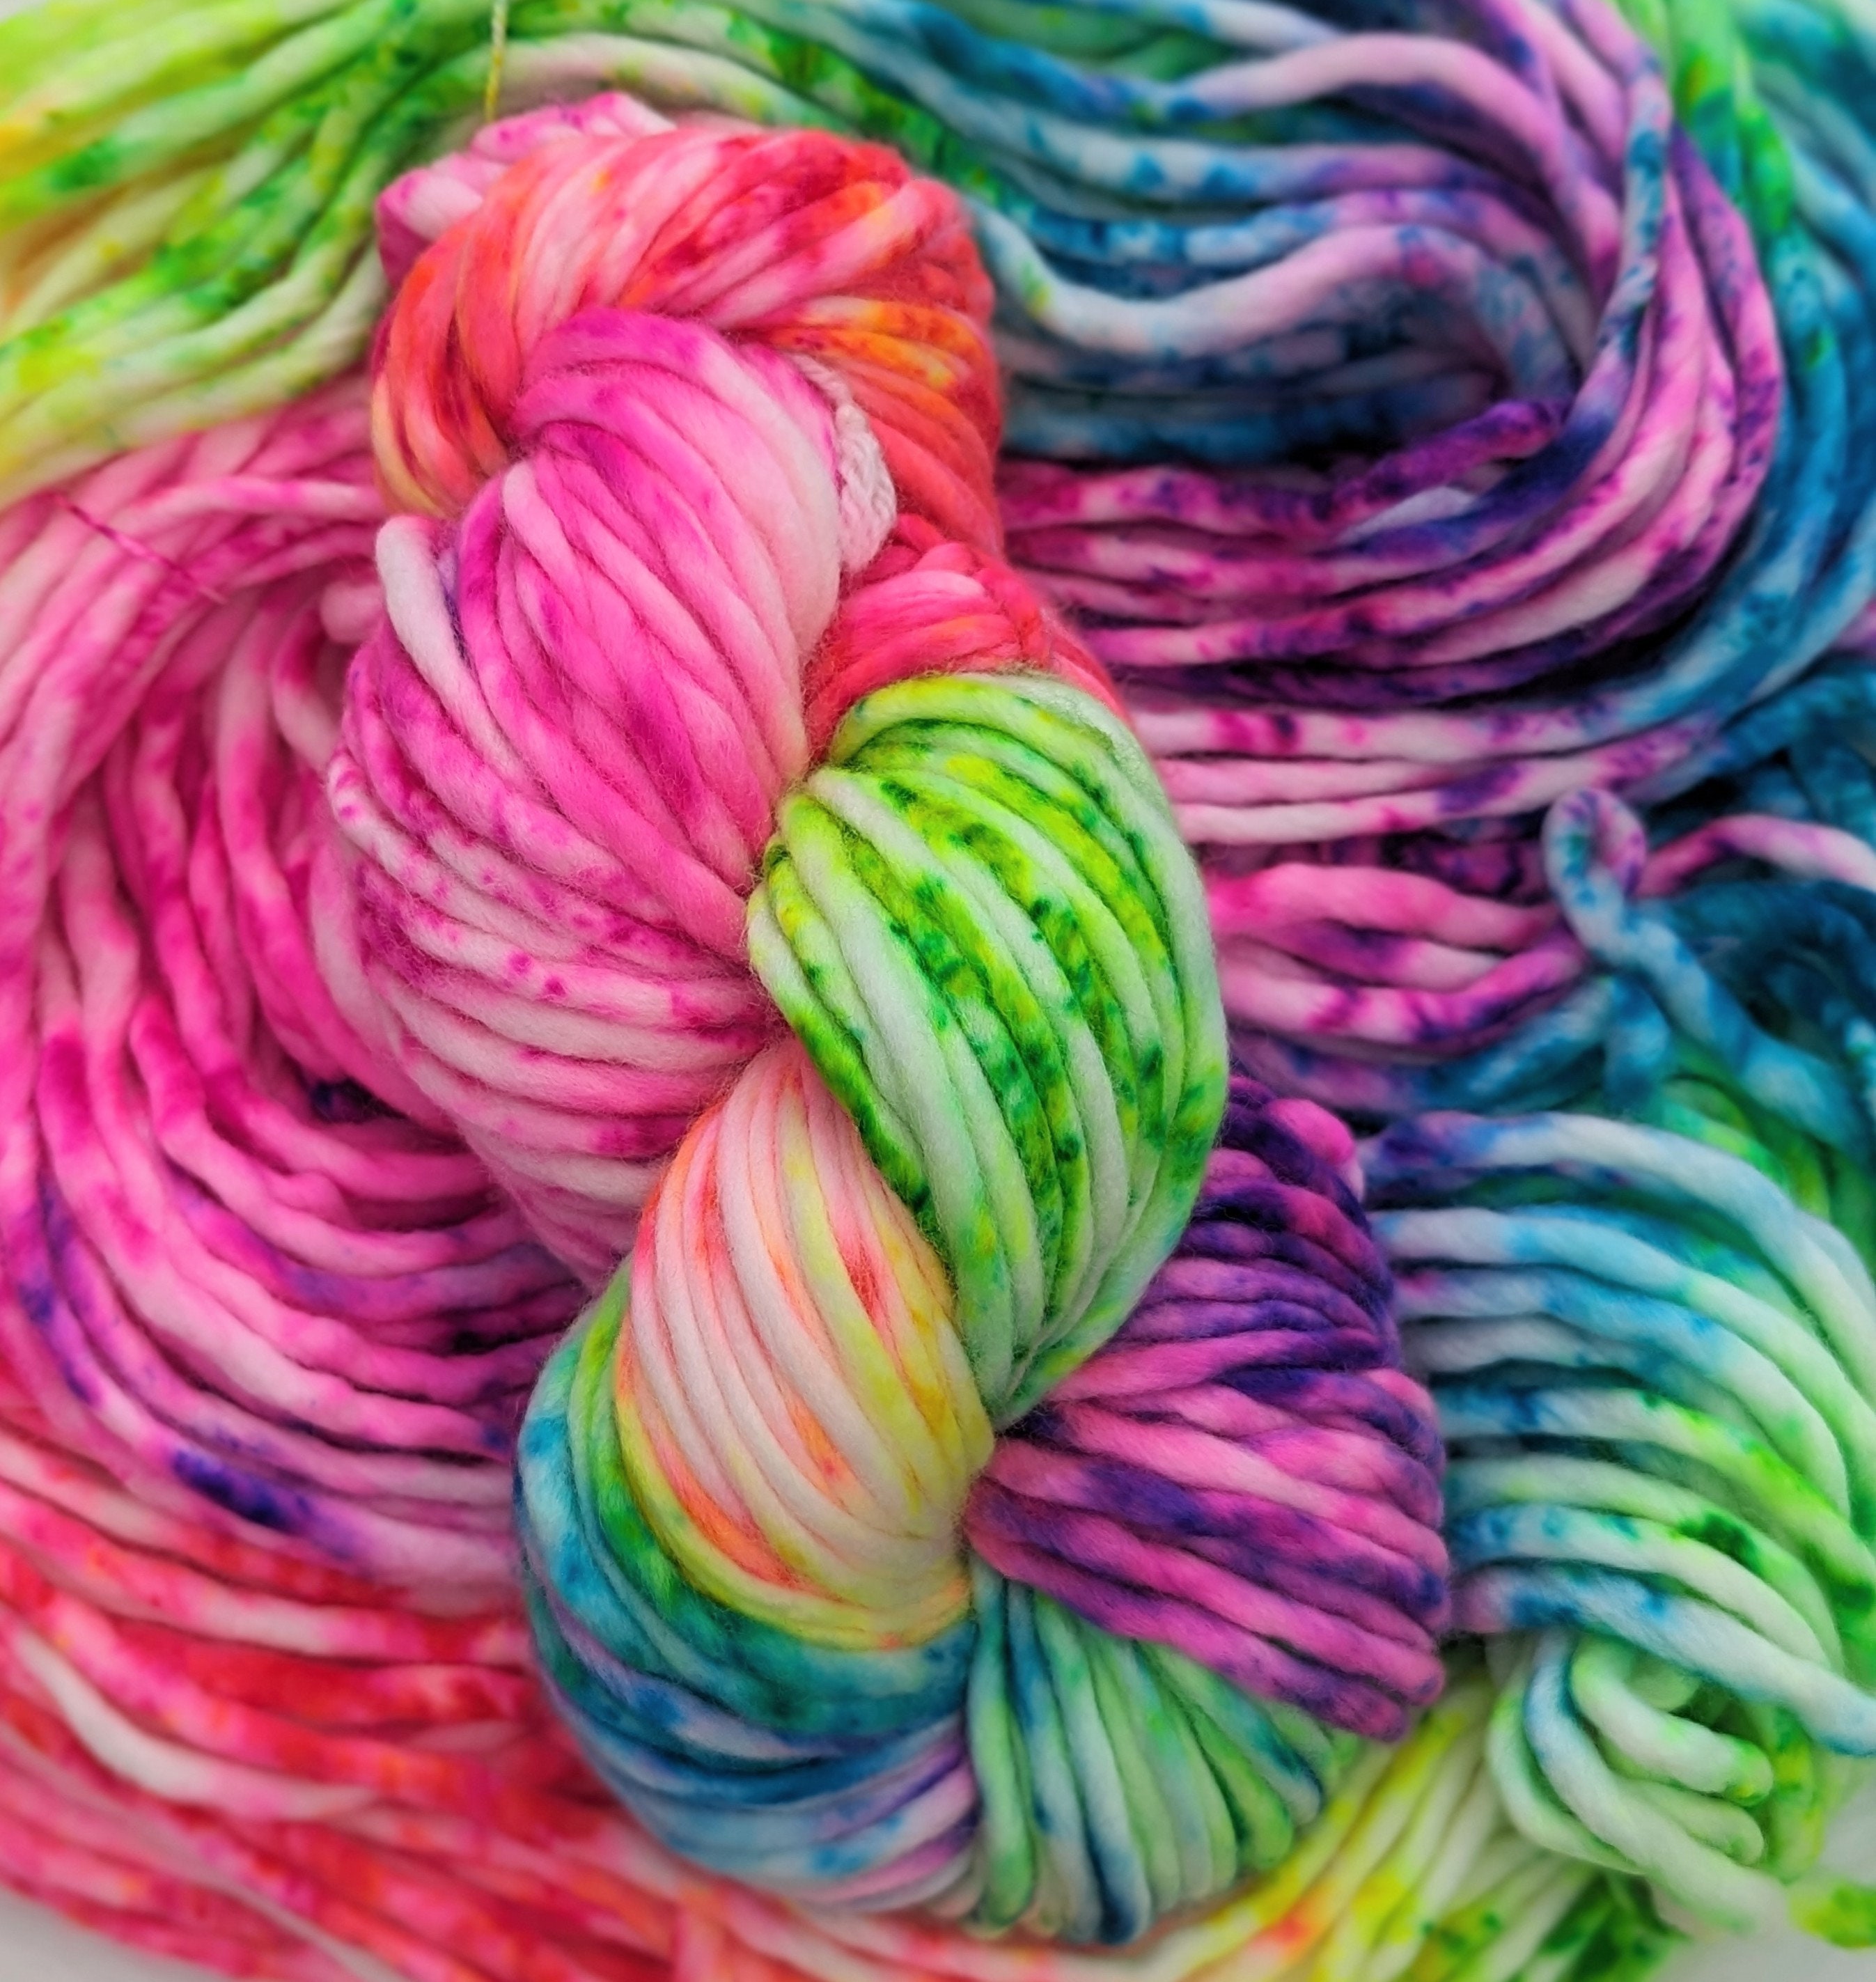 Worsted Weight Yarn, Hand Dyed, Speckled, Superwash Merino, Neon Rainbow  Speckled Yarn, Hand Dyed Yarn 100 G/218 Yds, Worsted Yarn Voila 